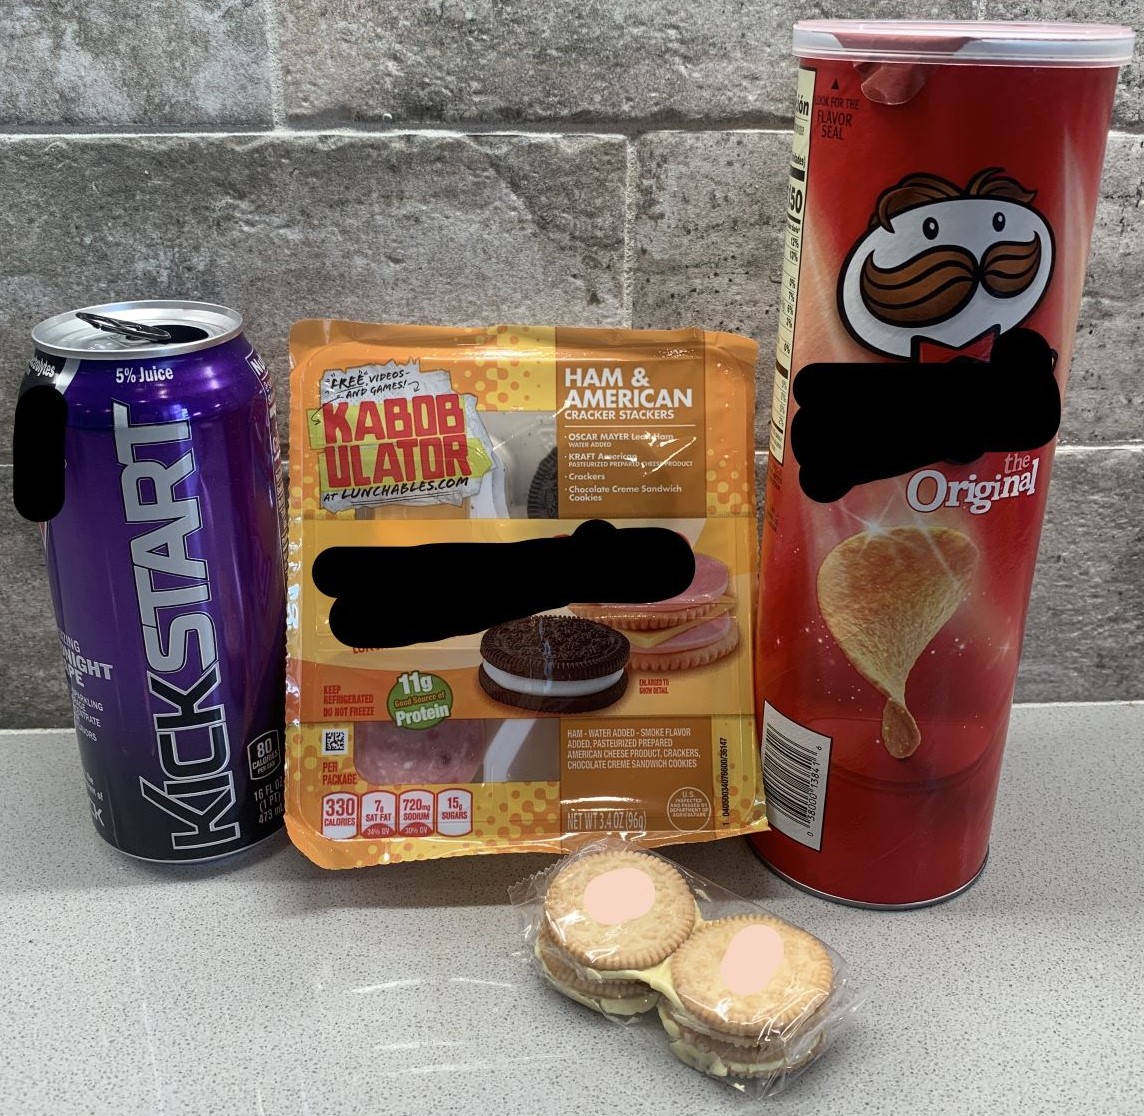 photo of prepackaged lunch, cookies, chips, and caffeine drink